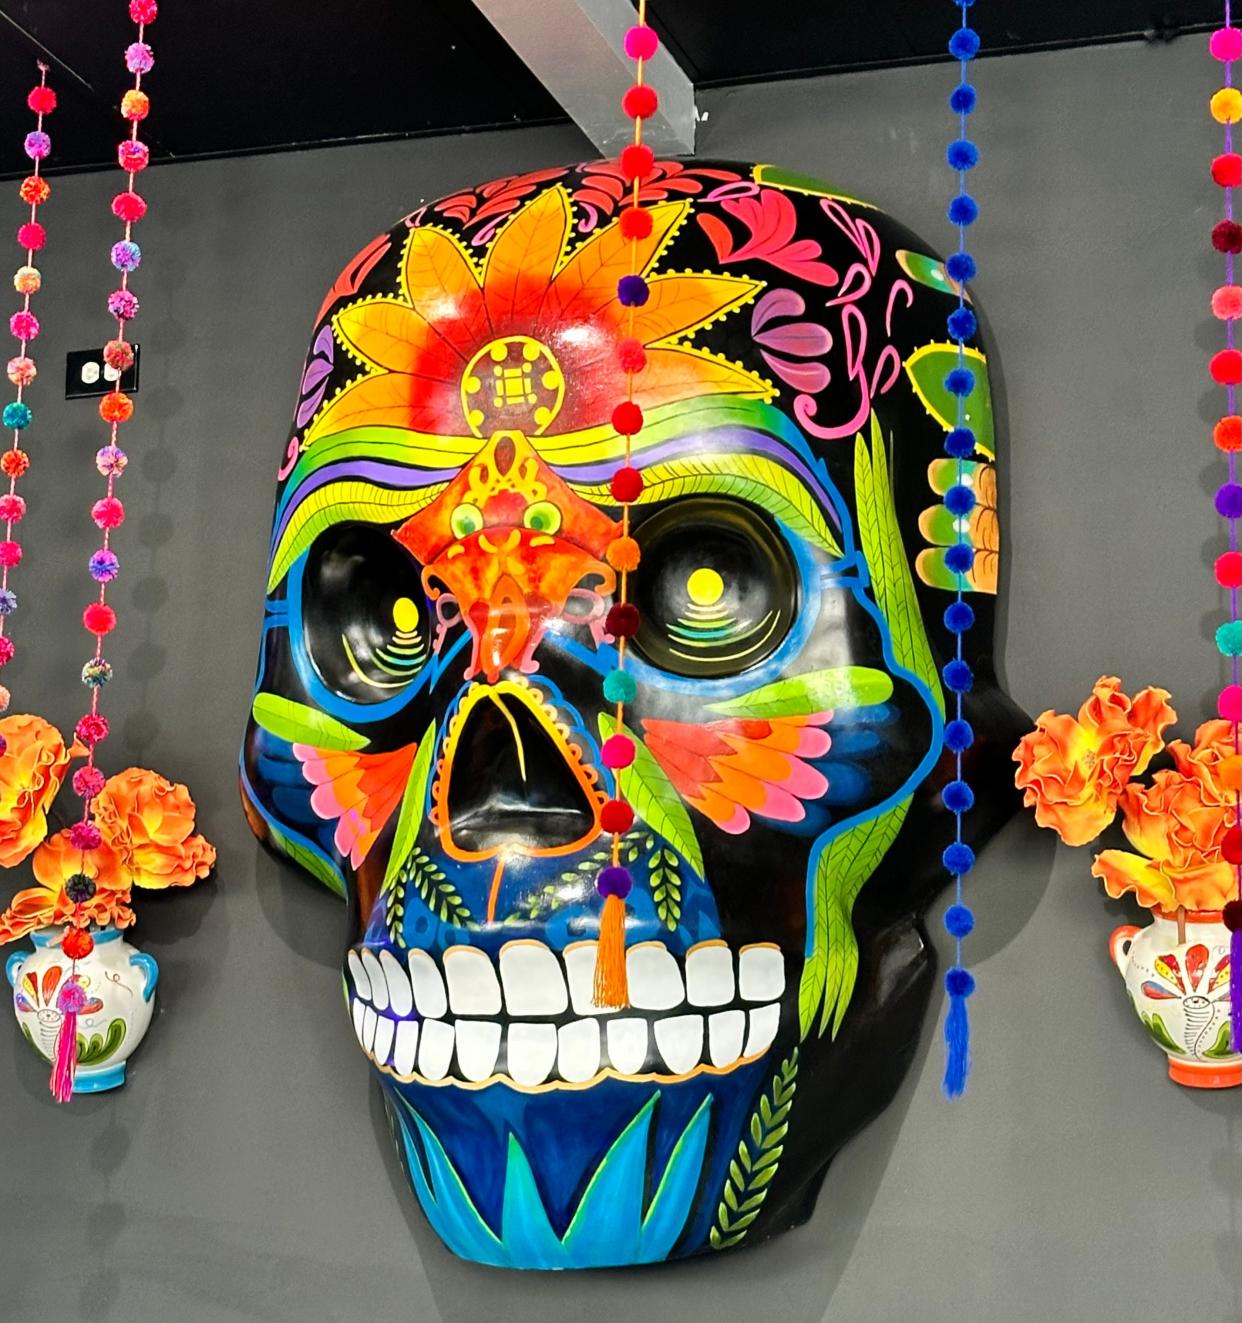 Blue Habanero showcases this larger-than-life mask in celebration of Mexican culture and heritage.